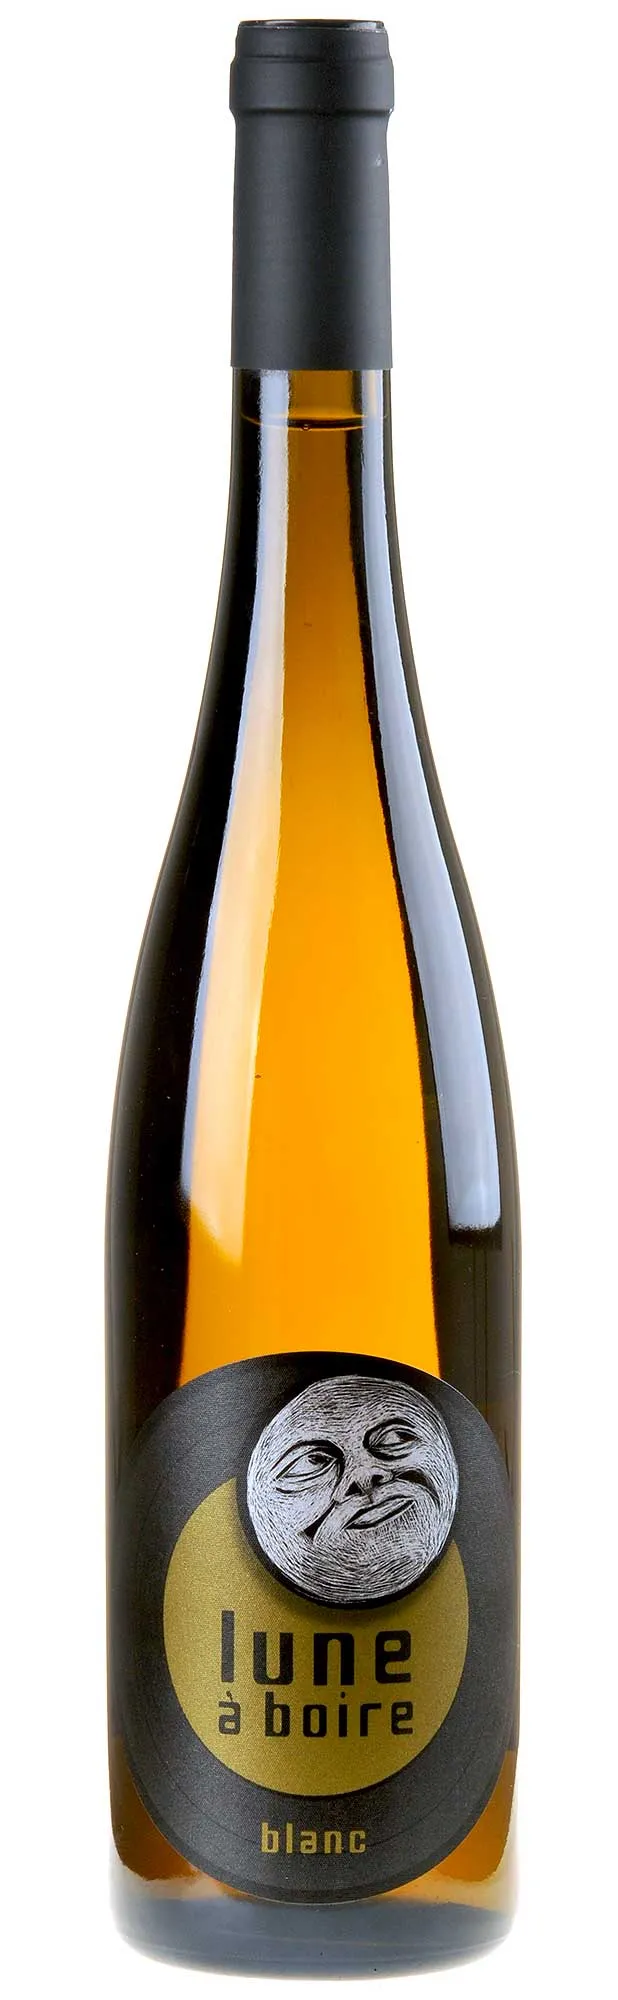 Bottle of Marc Kreydenweiss Lune à Boire Blancwith label visible